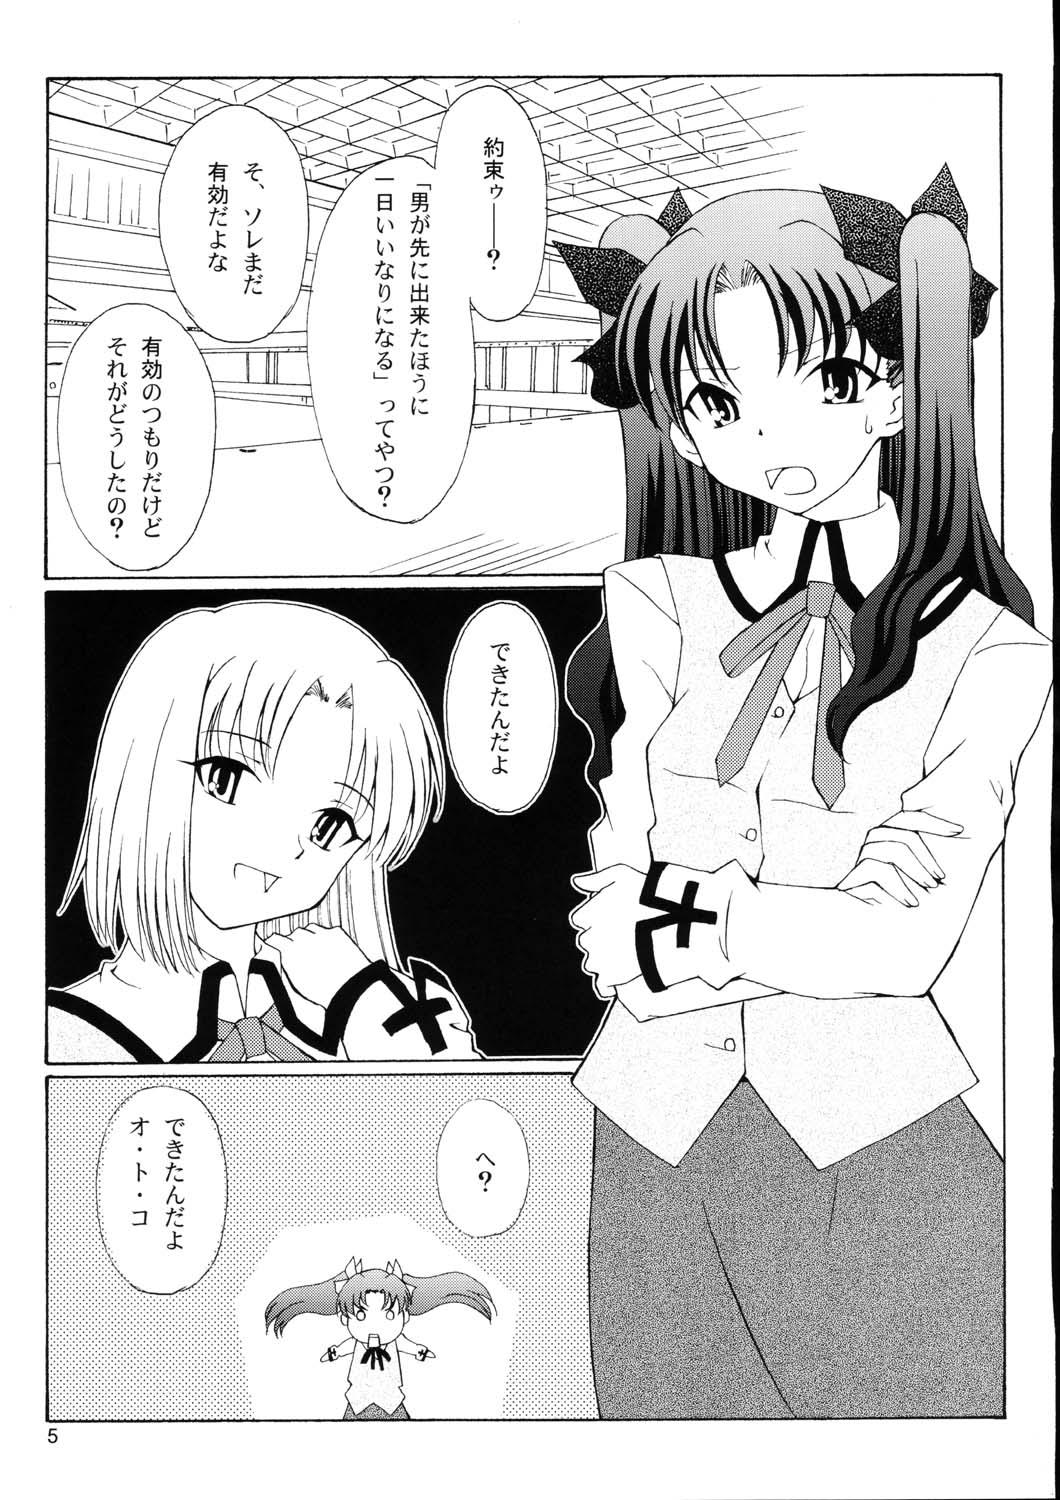 Glam Previous Night - Fate stay night 4some - Page 4